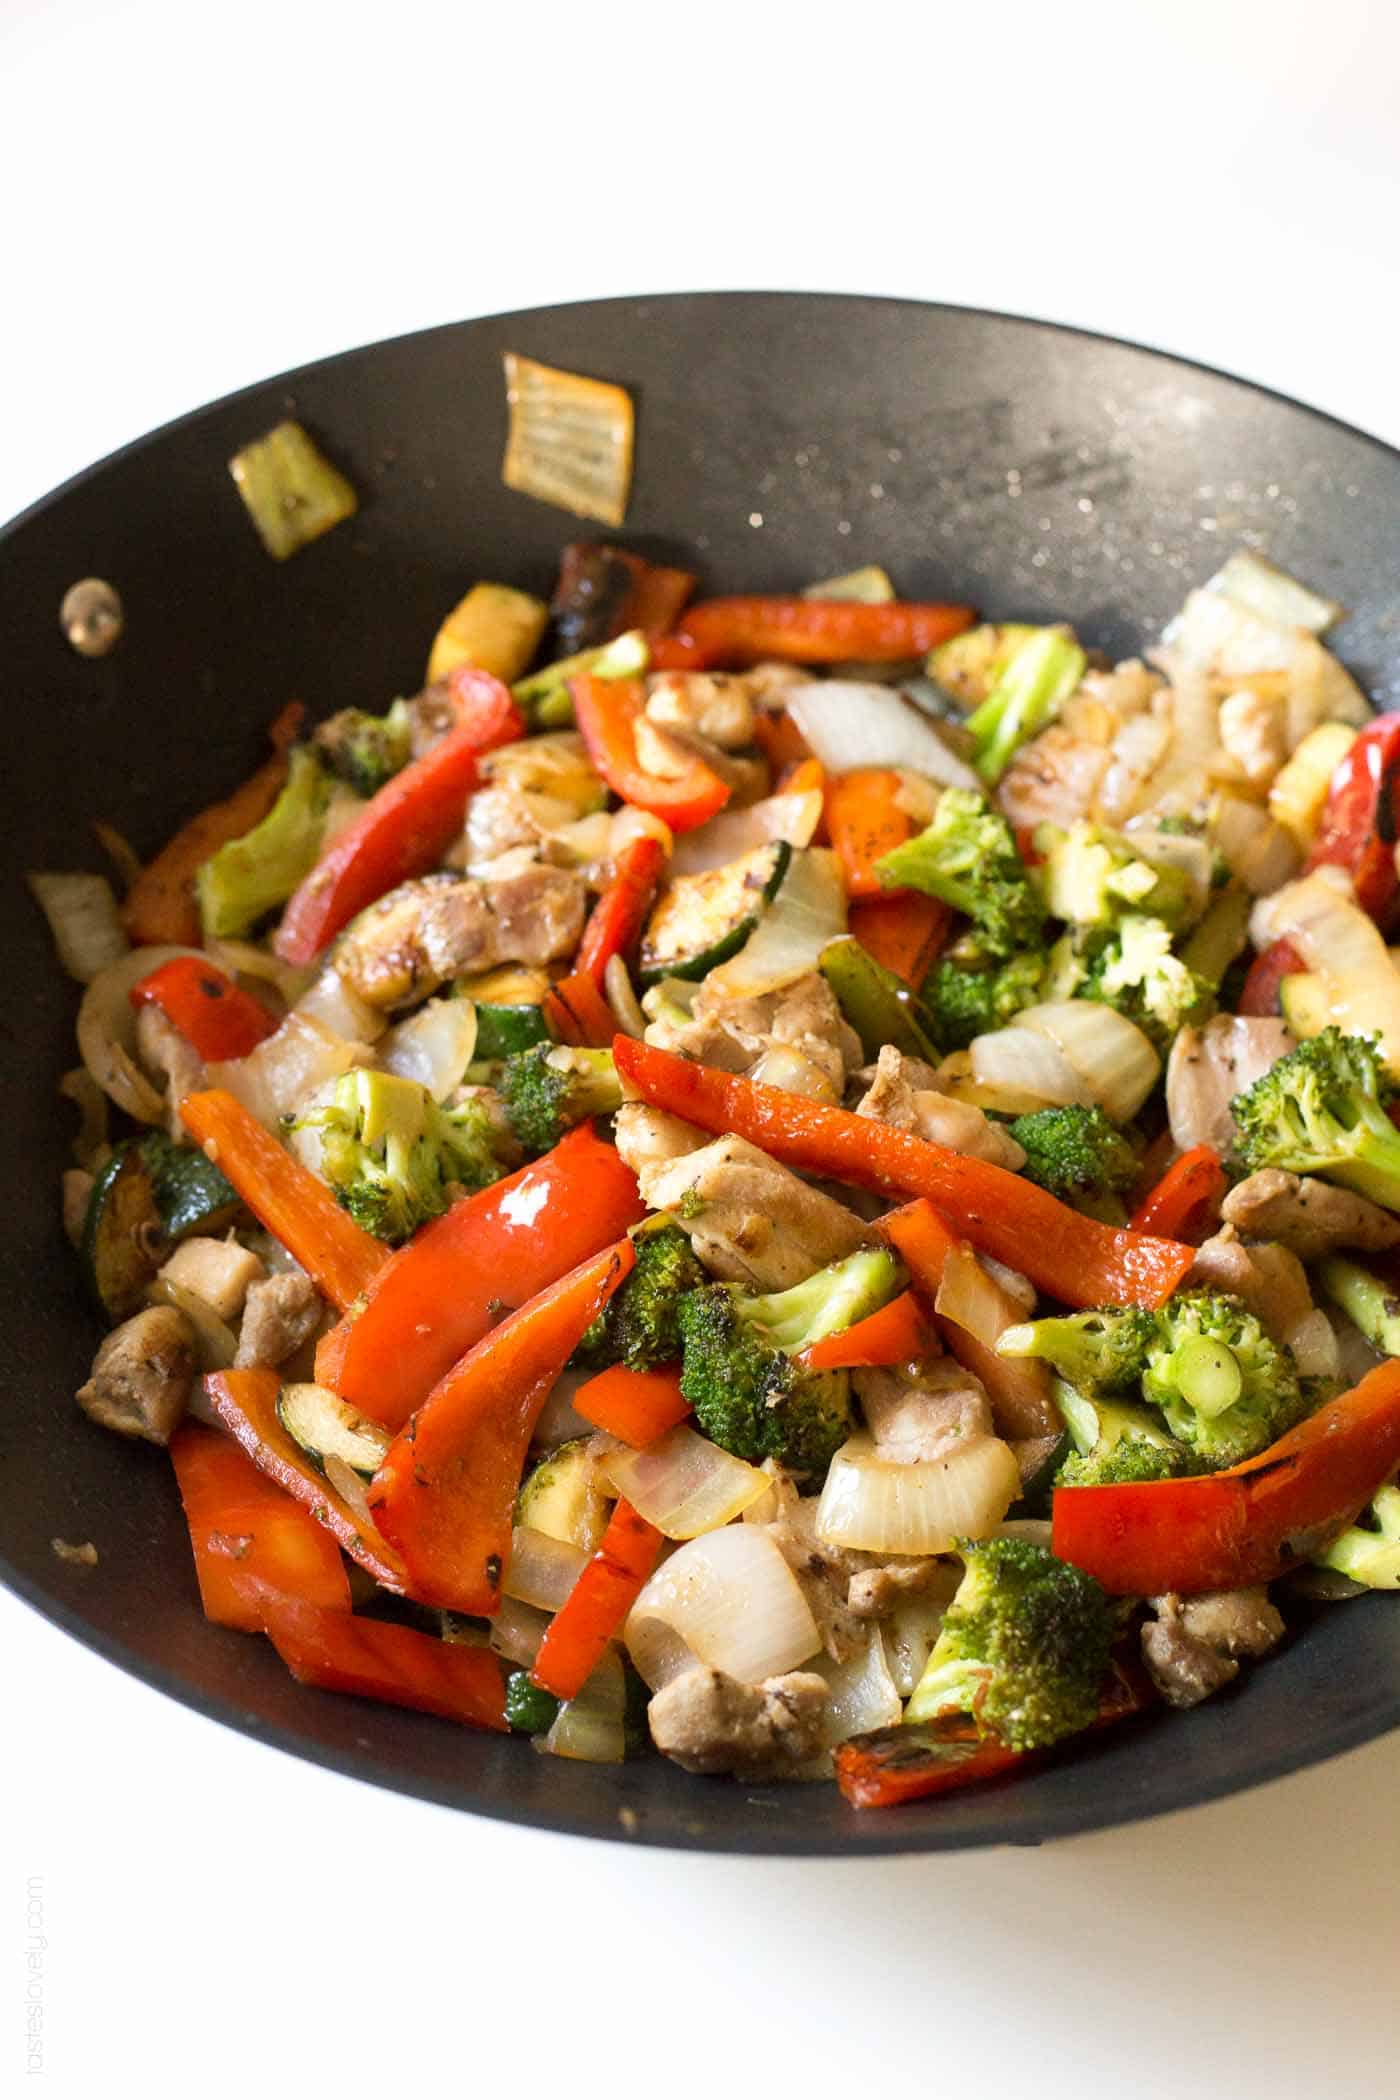 Broccoli and Bell Pepper Chicken Stir Fry - Tastes Lovely